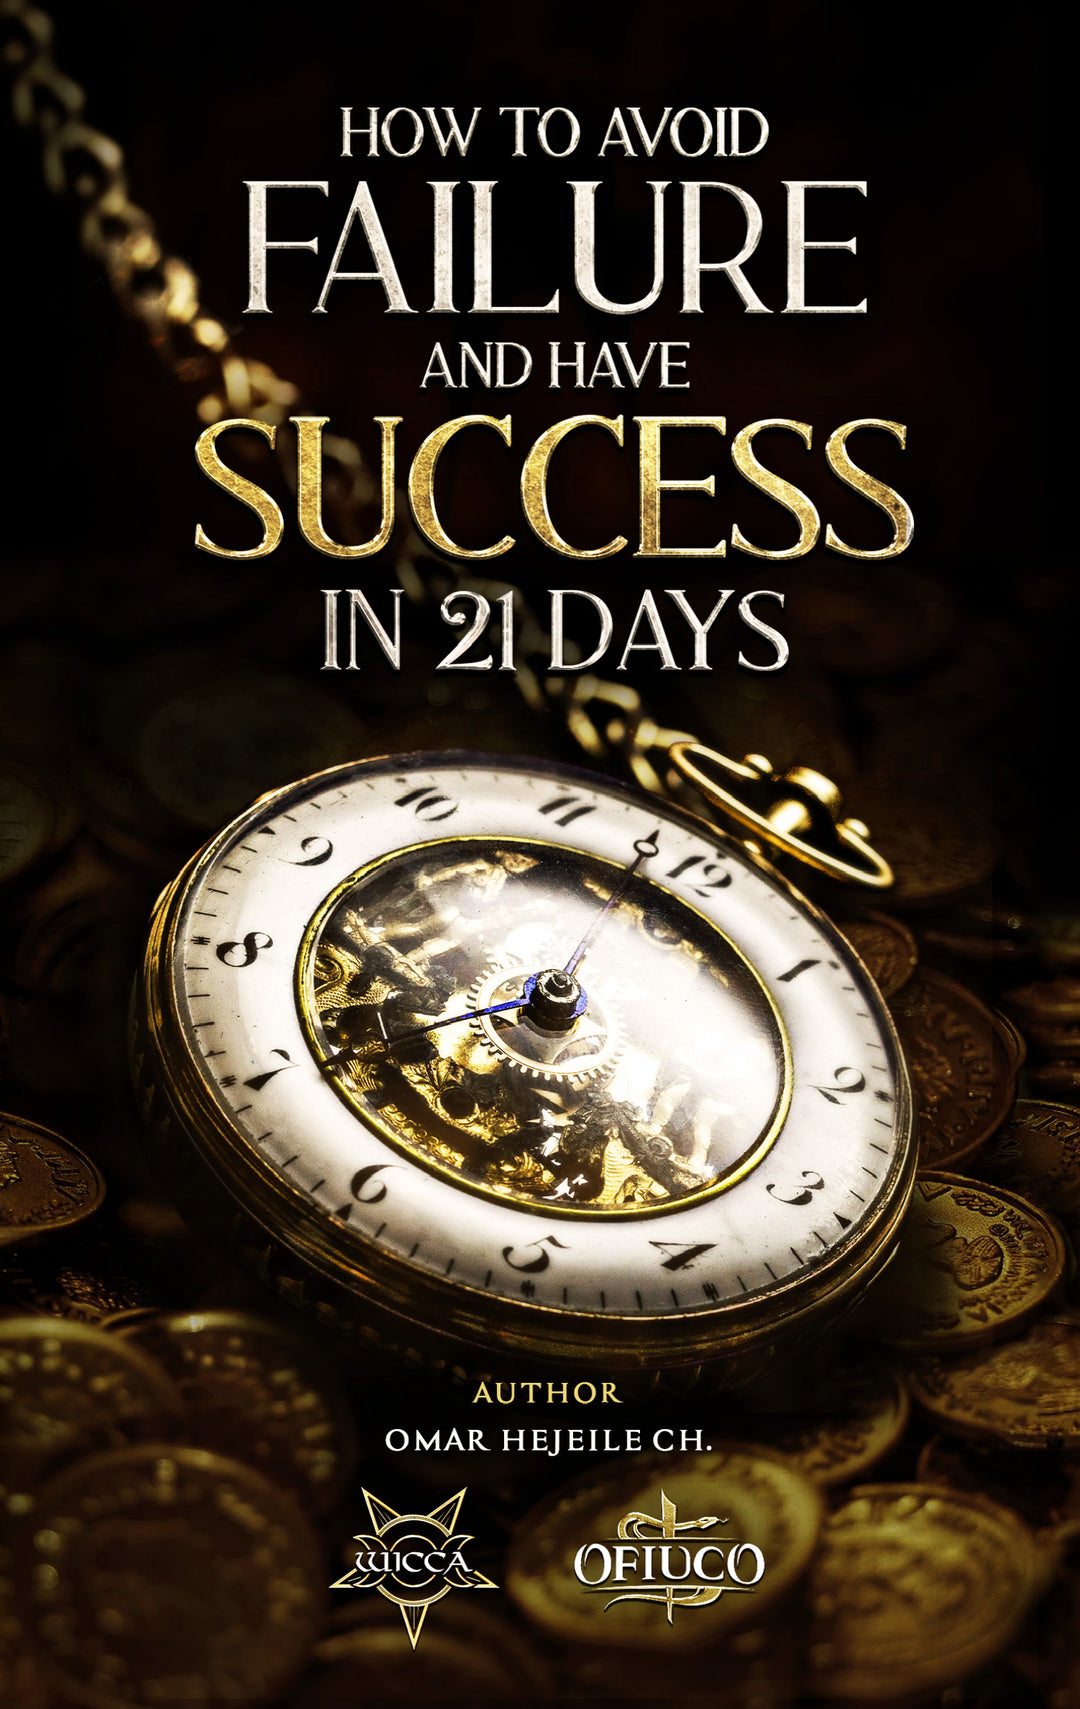 Book How To Avoid Failure And Have Success In 21 Days